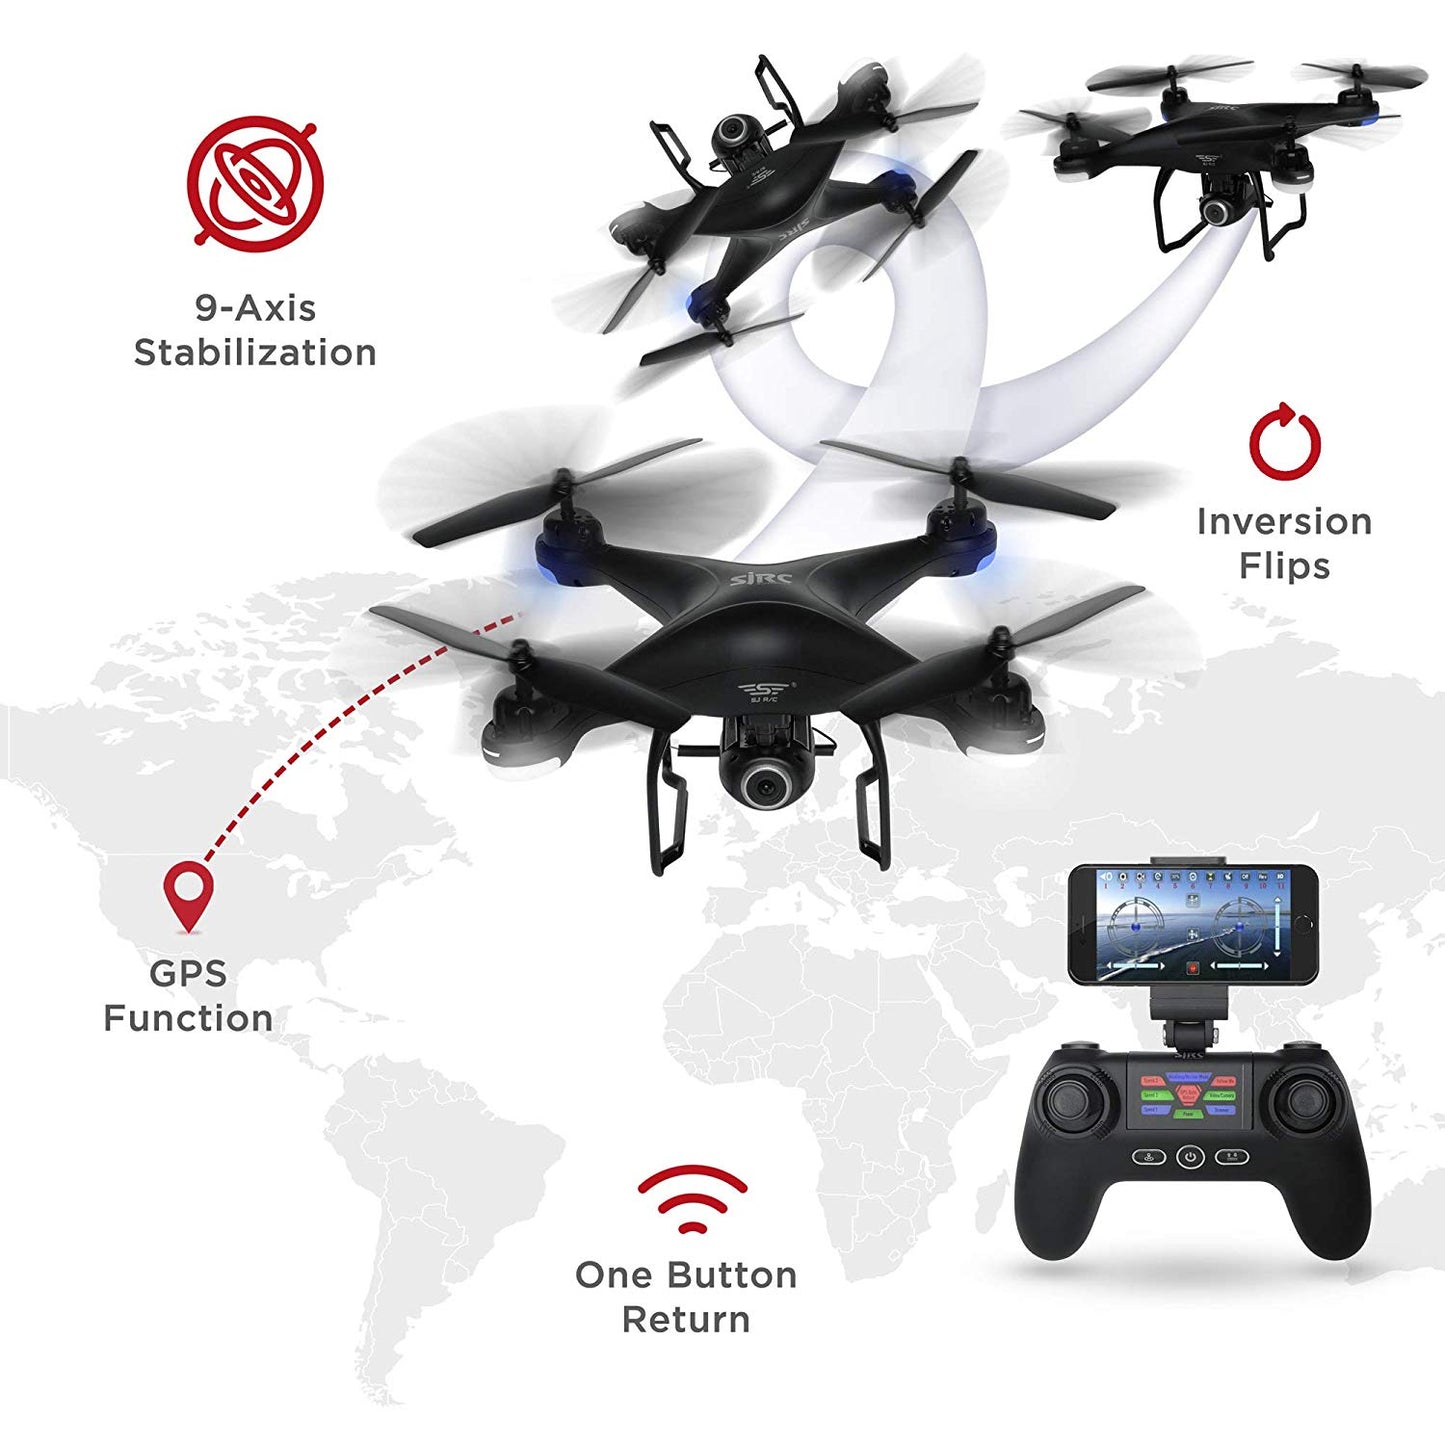 2.4G FPV RC Quadcopter GPS Drone w/ 720P Live HD Wifi Camera, VR Headset Compatible, Follow Mode, One-Key Takeoff/Landing, Auto-Return, Headless Mode, Altitude Hold, Extra Battery